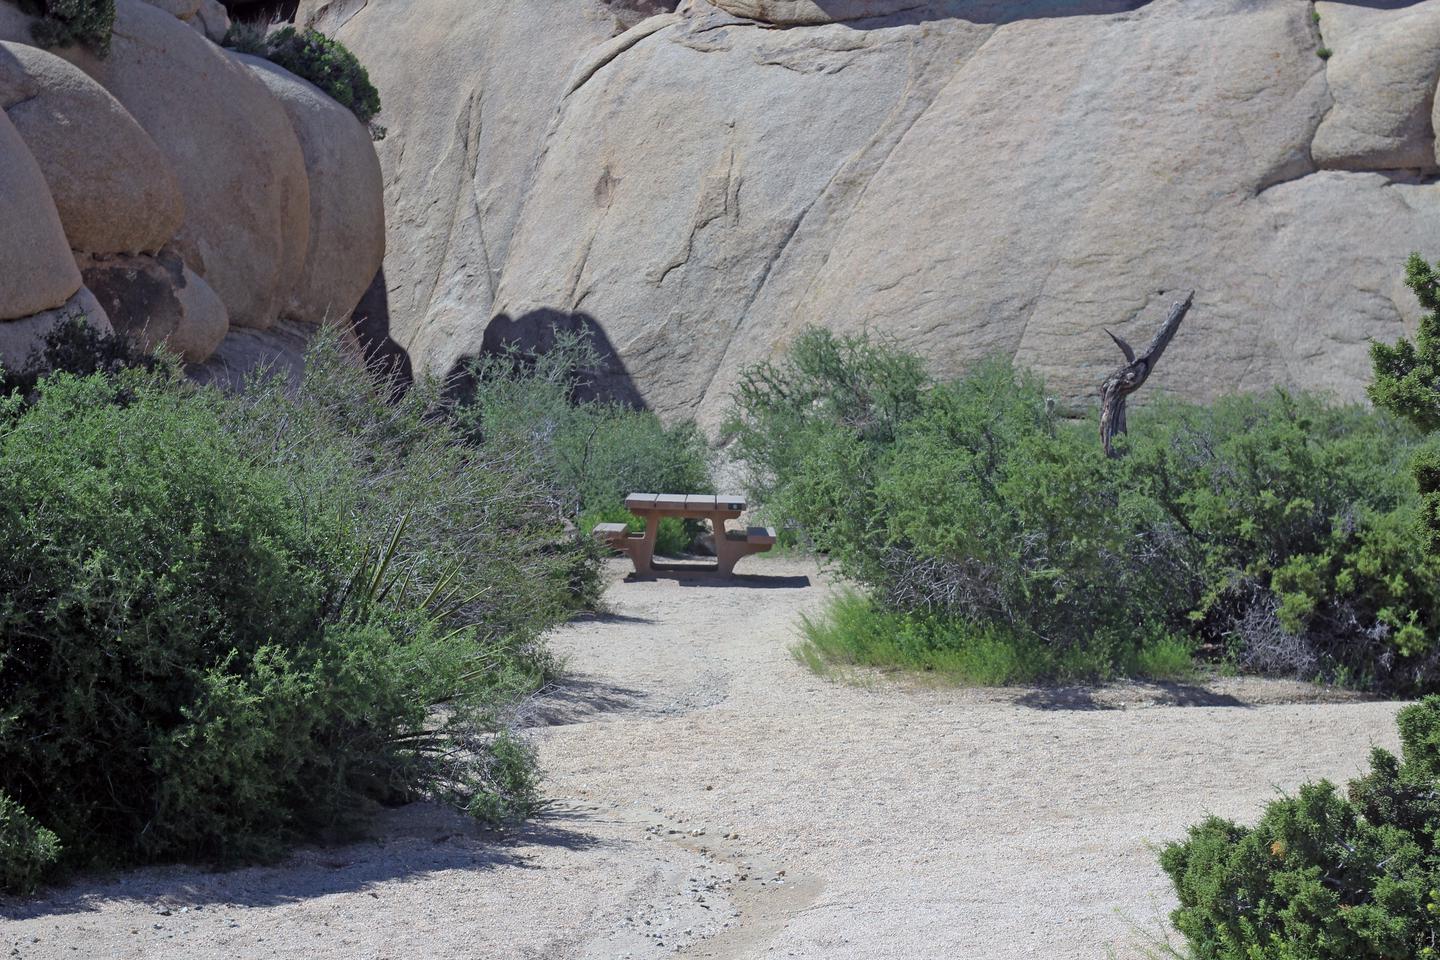 Campsite  with picnic table surrounded by boulders and green plants.Campsite picture.